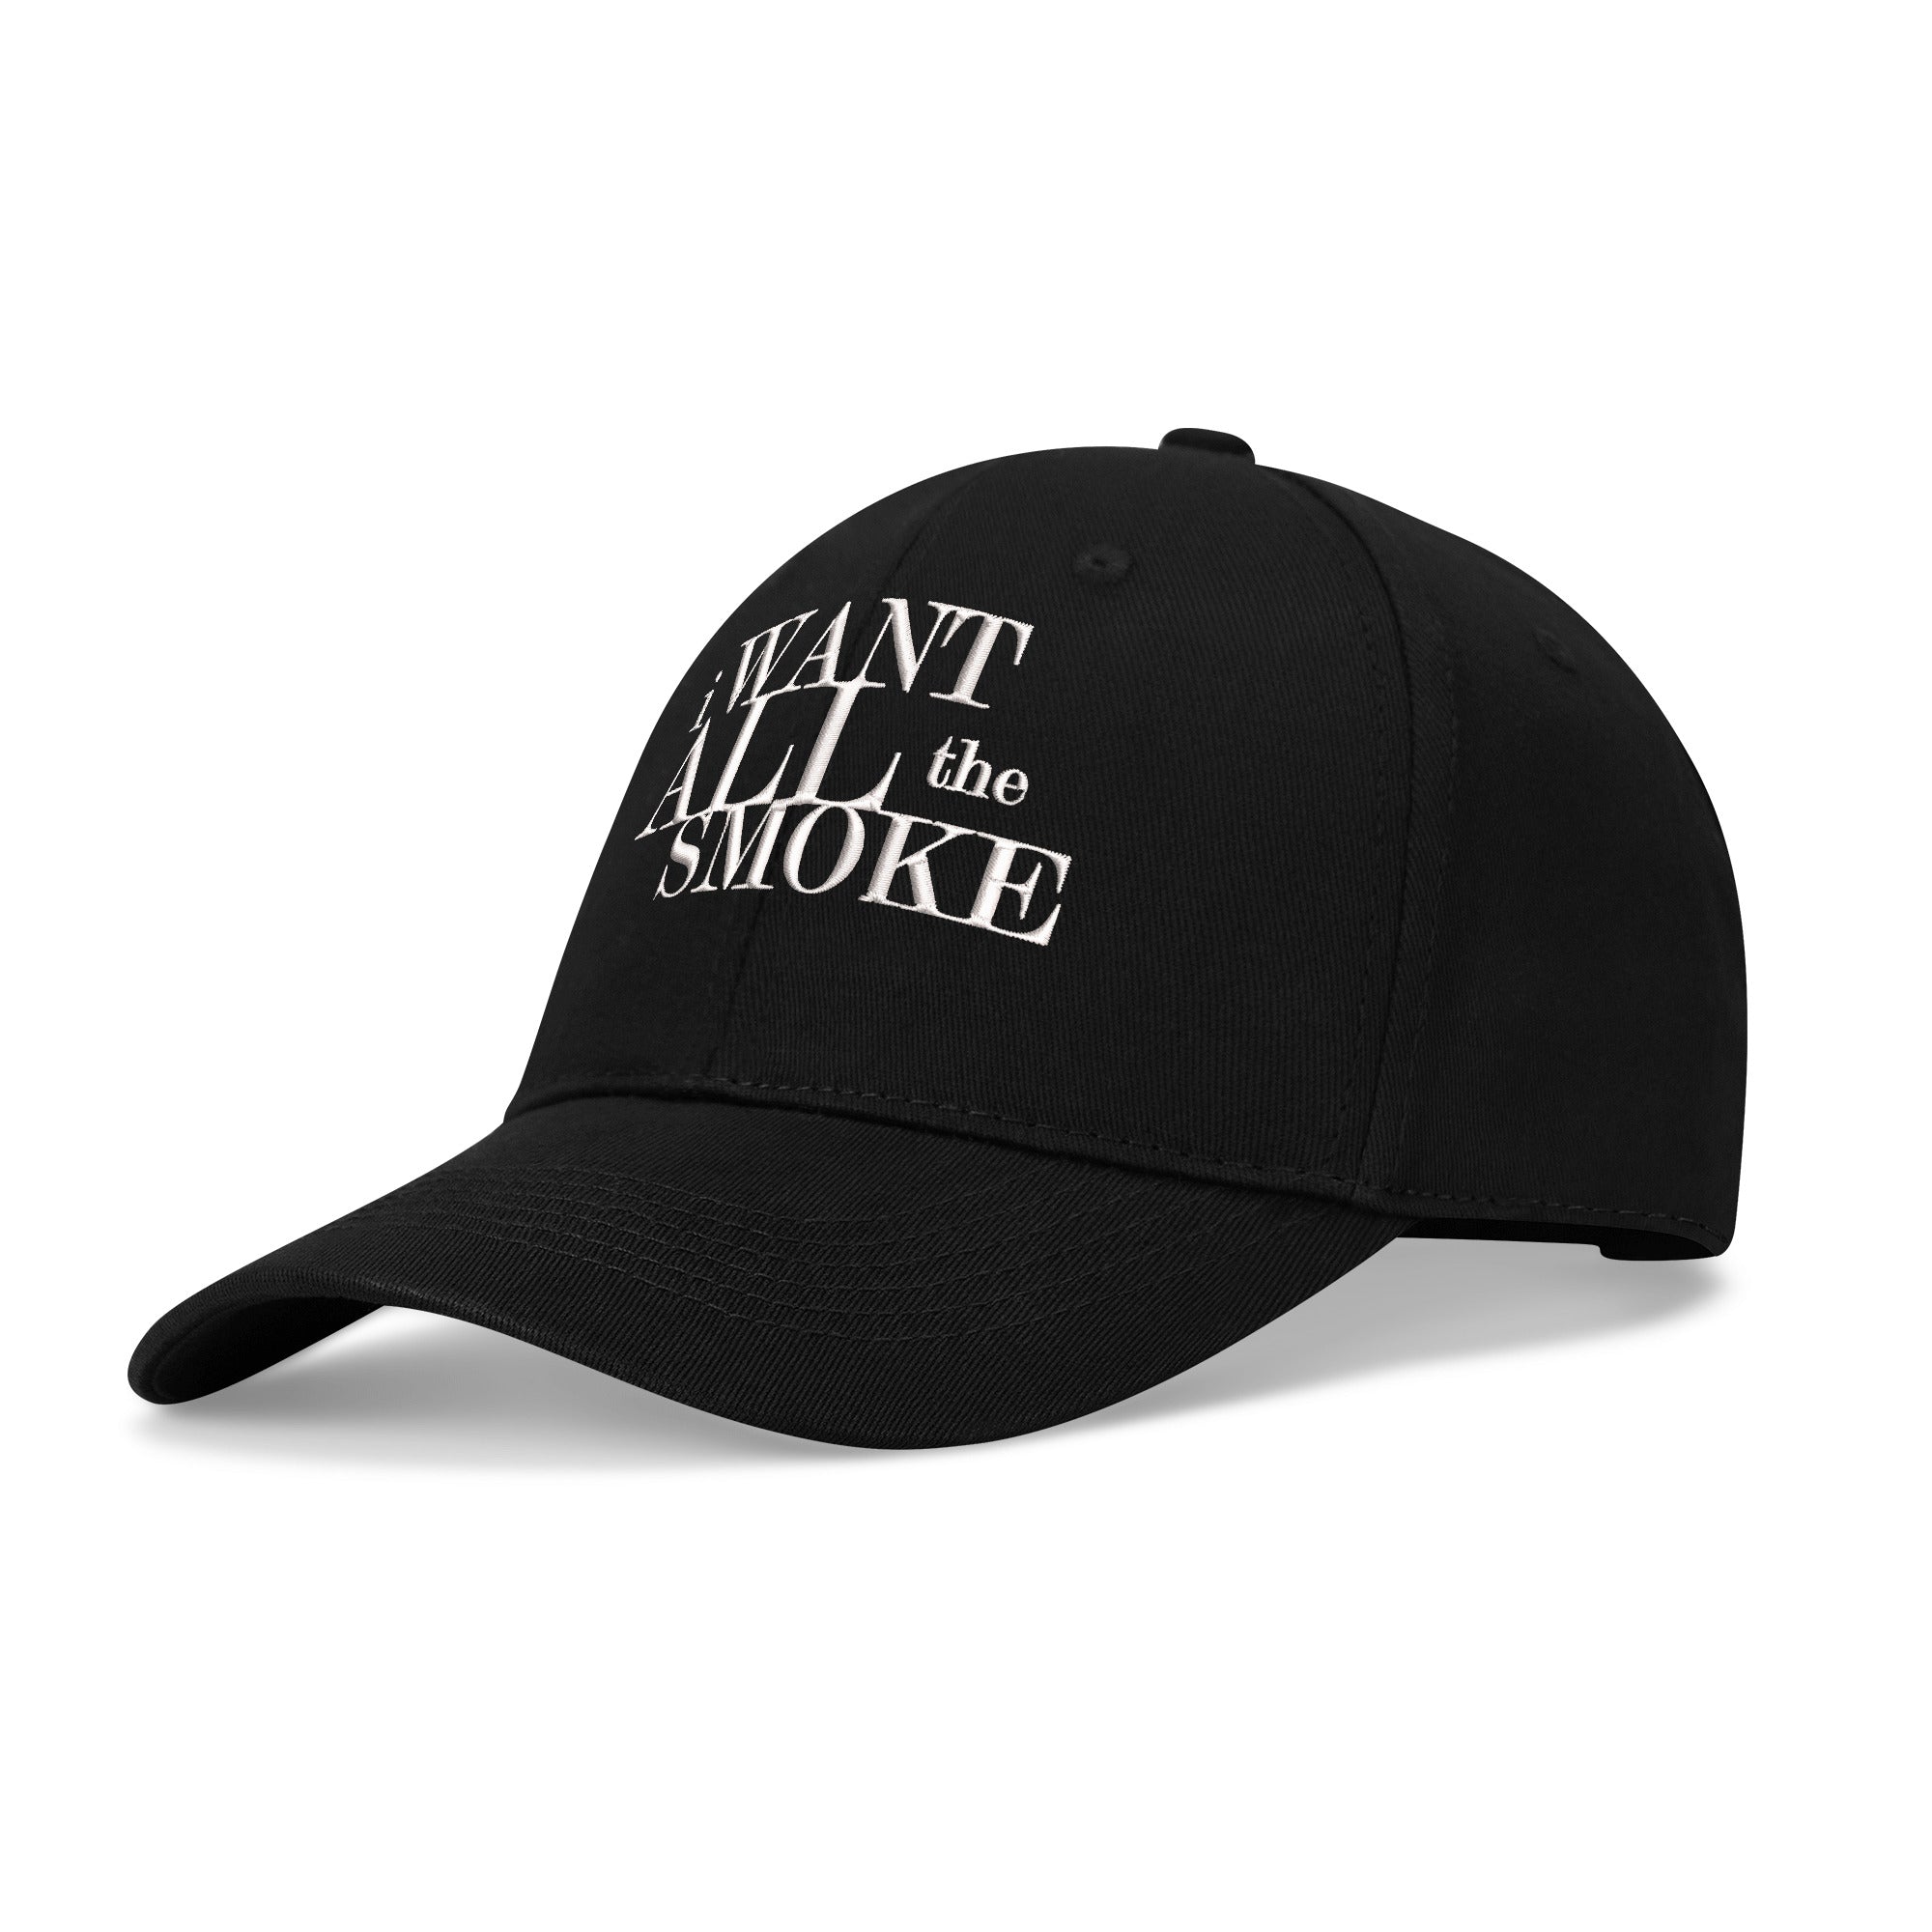 I Want All The Smoke Four Sides Embroidered Baseball Caps